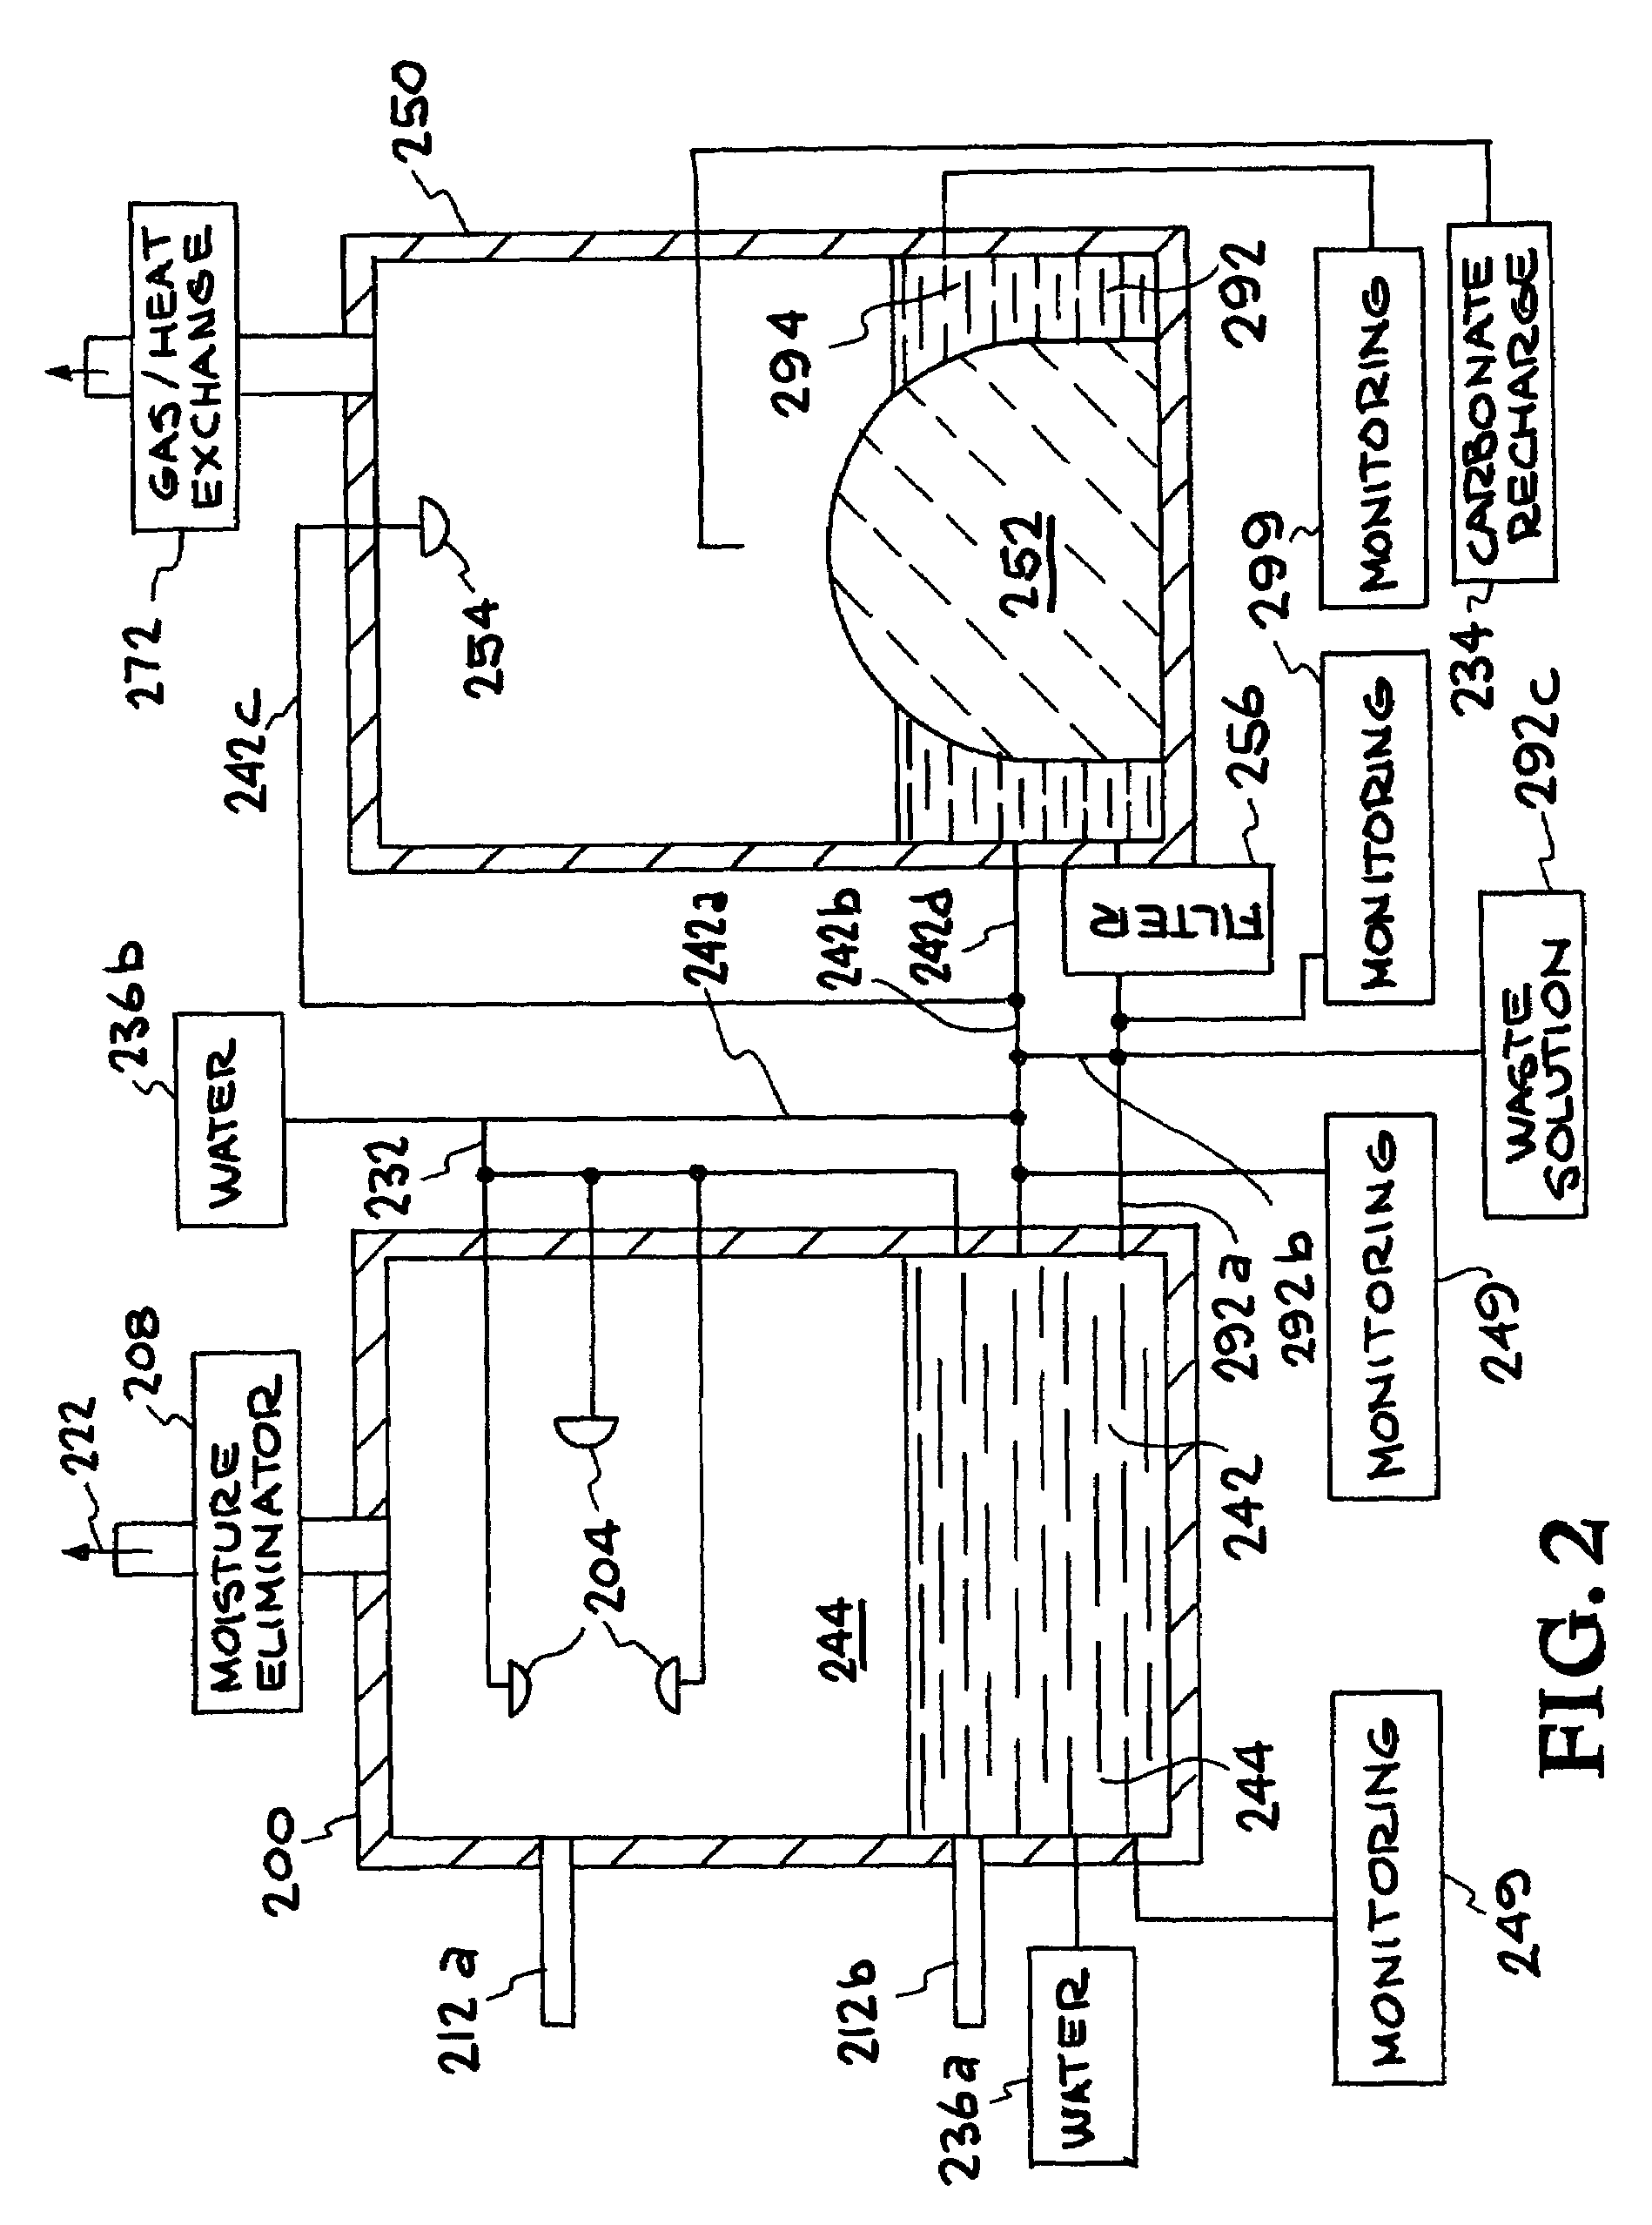 Apparatus for extracting and sequestering carbon dioxide